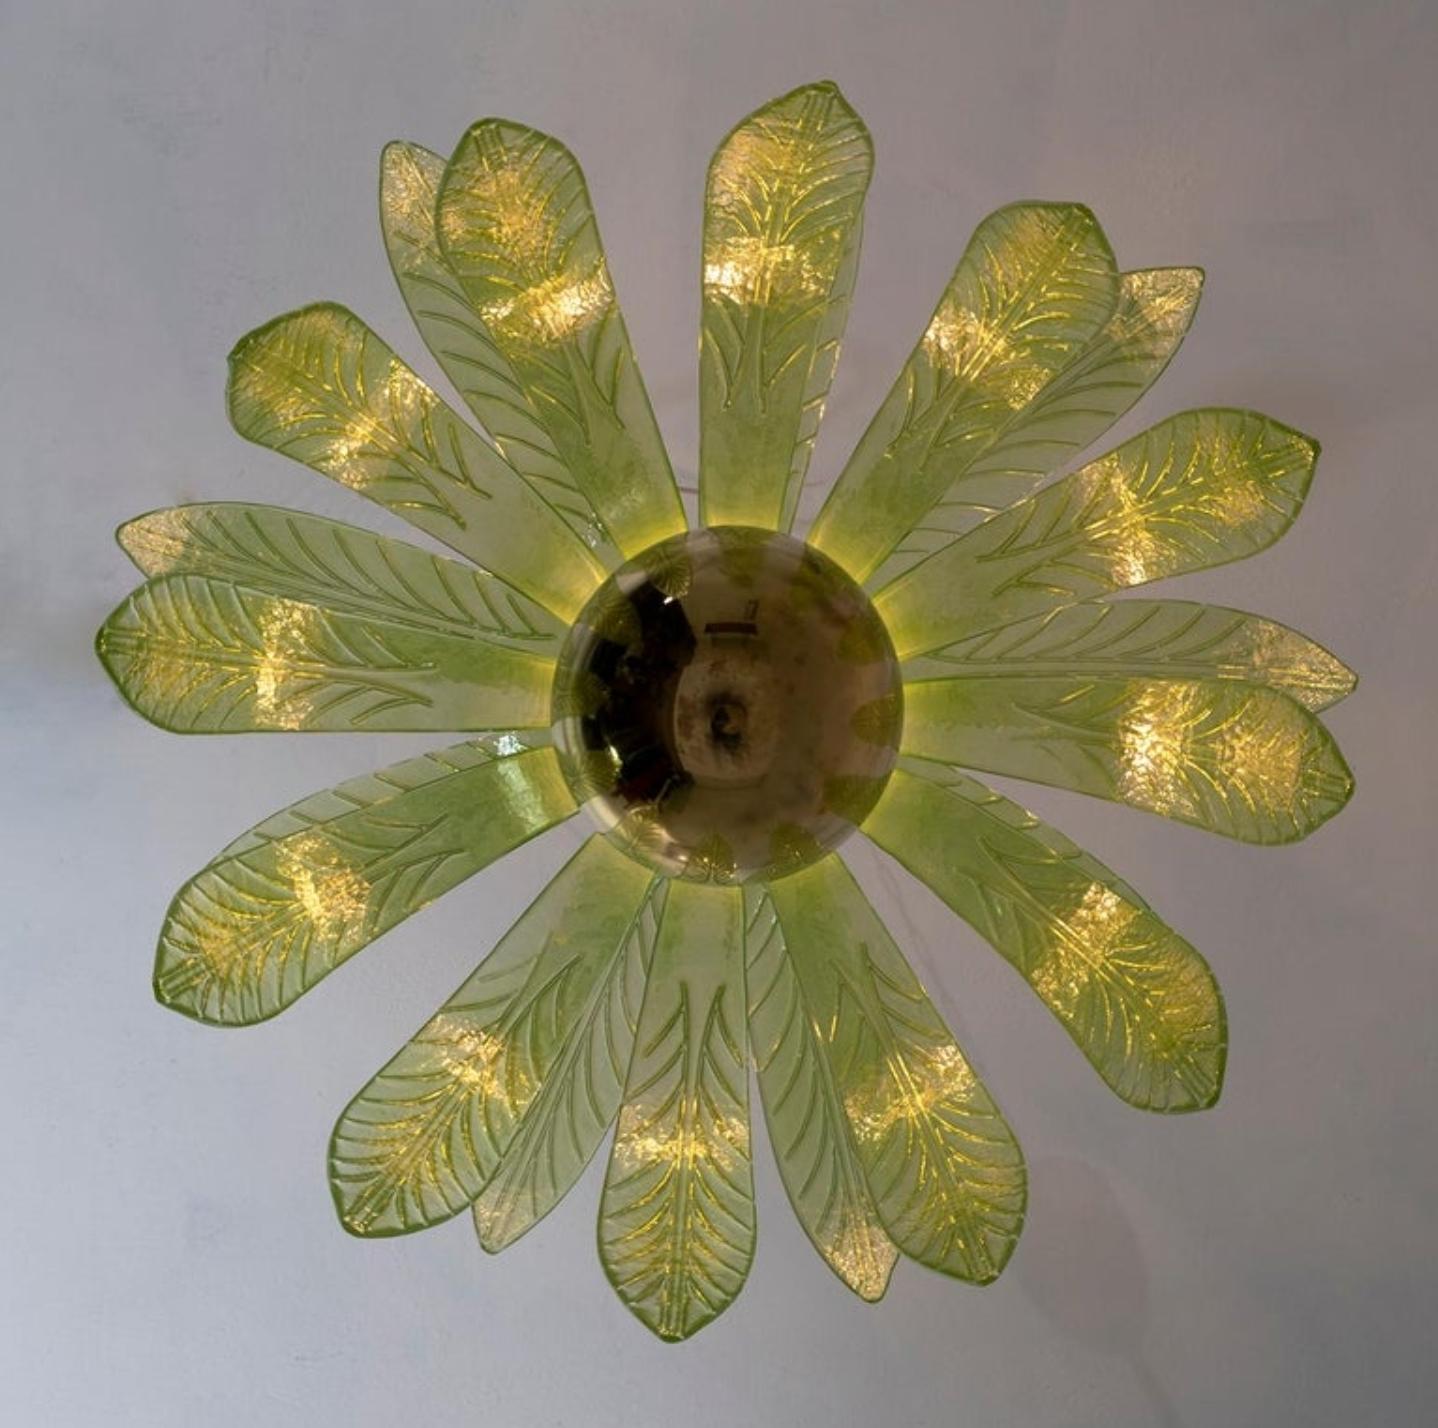 Mouth blown murano glass chandelier, 21 green murano glass leaves, brass structure, five bulbs.
The chandelier reproduces the crown of a palm tree.
We supply reducers for USA E12 bulbs

